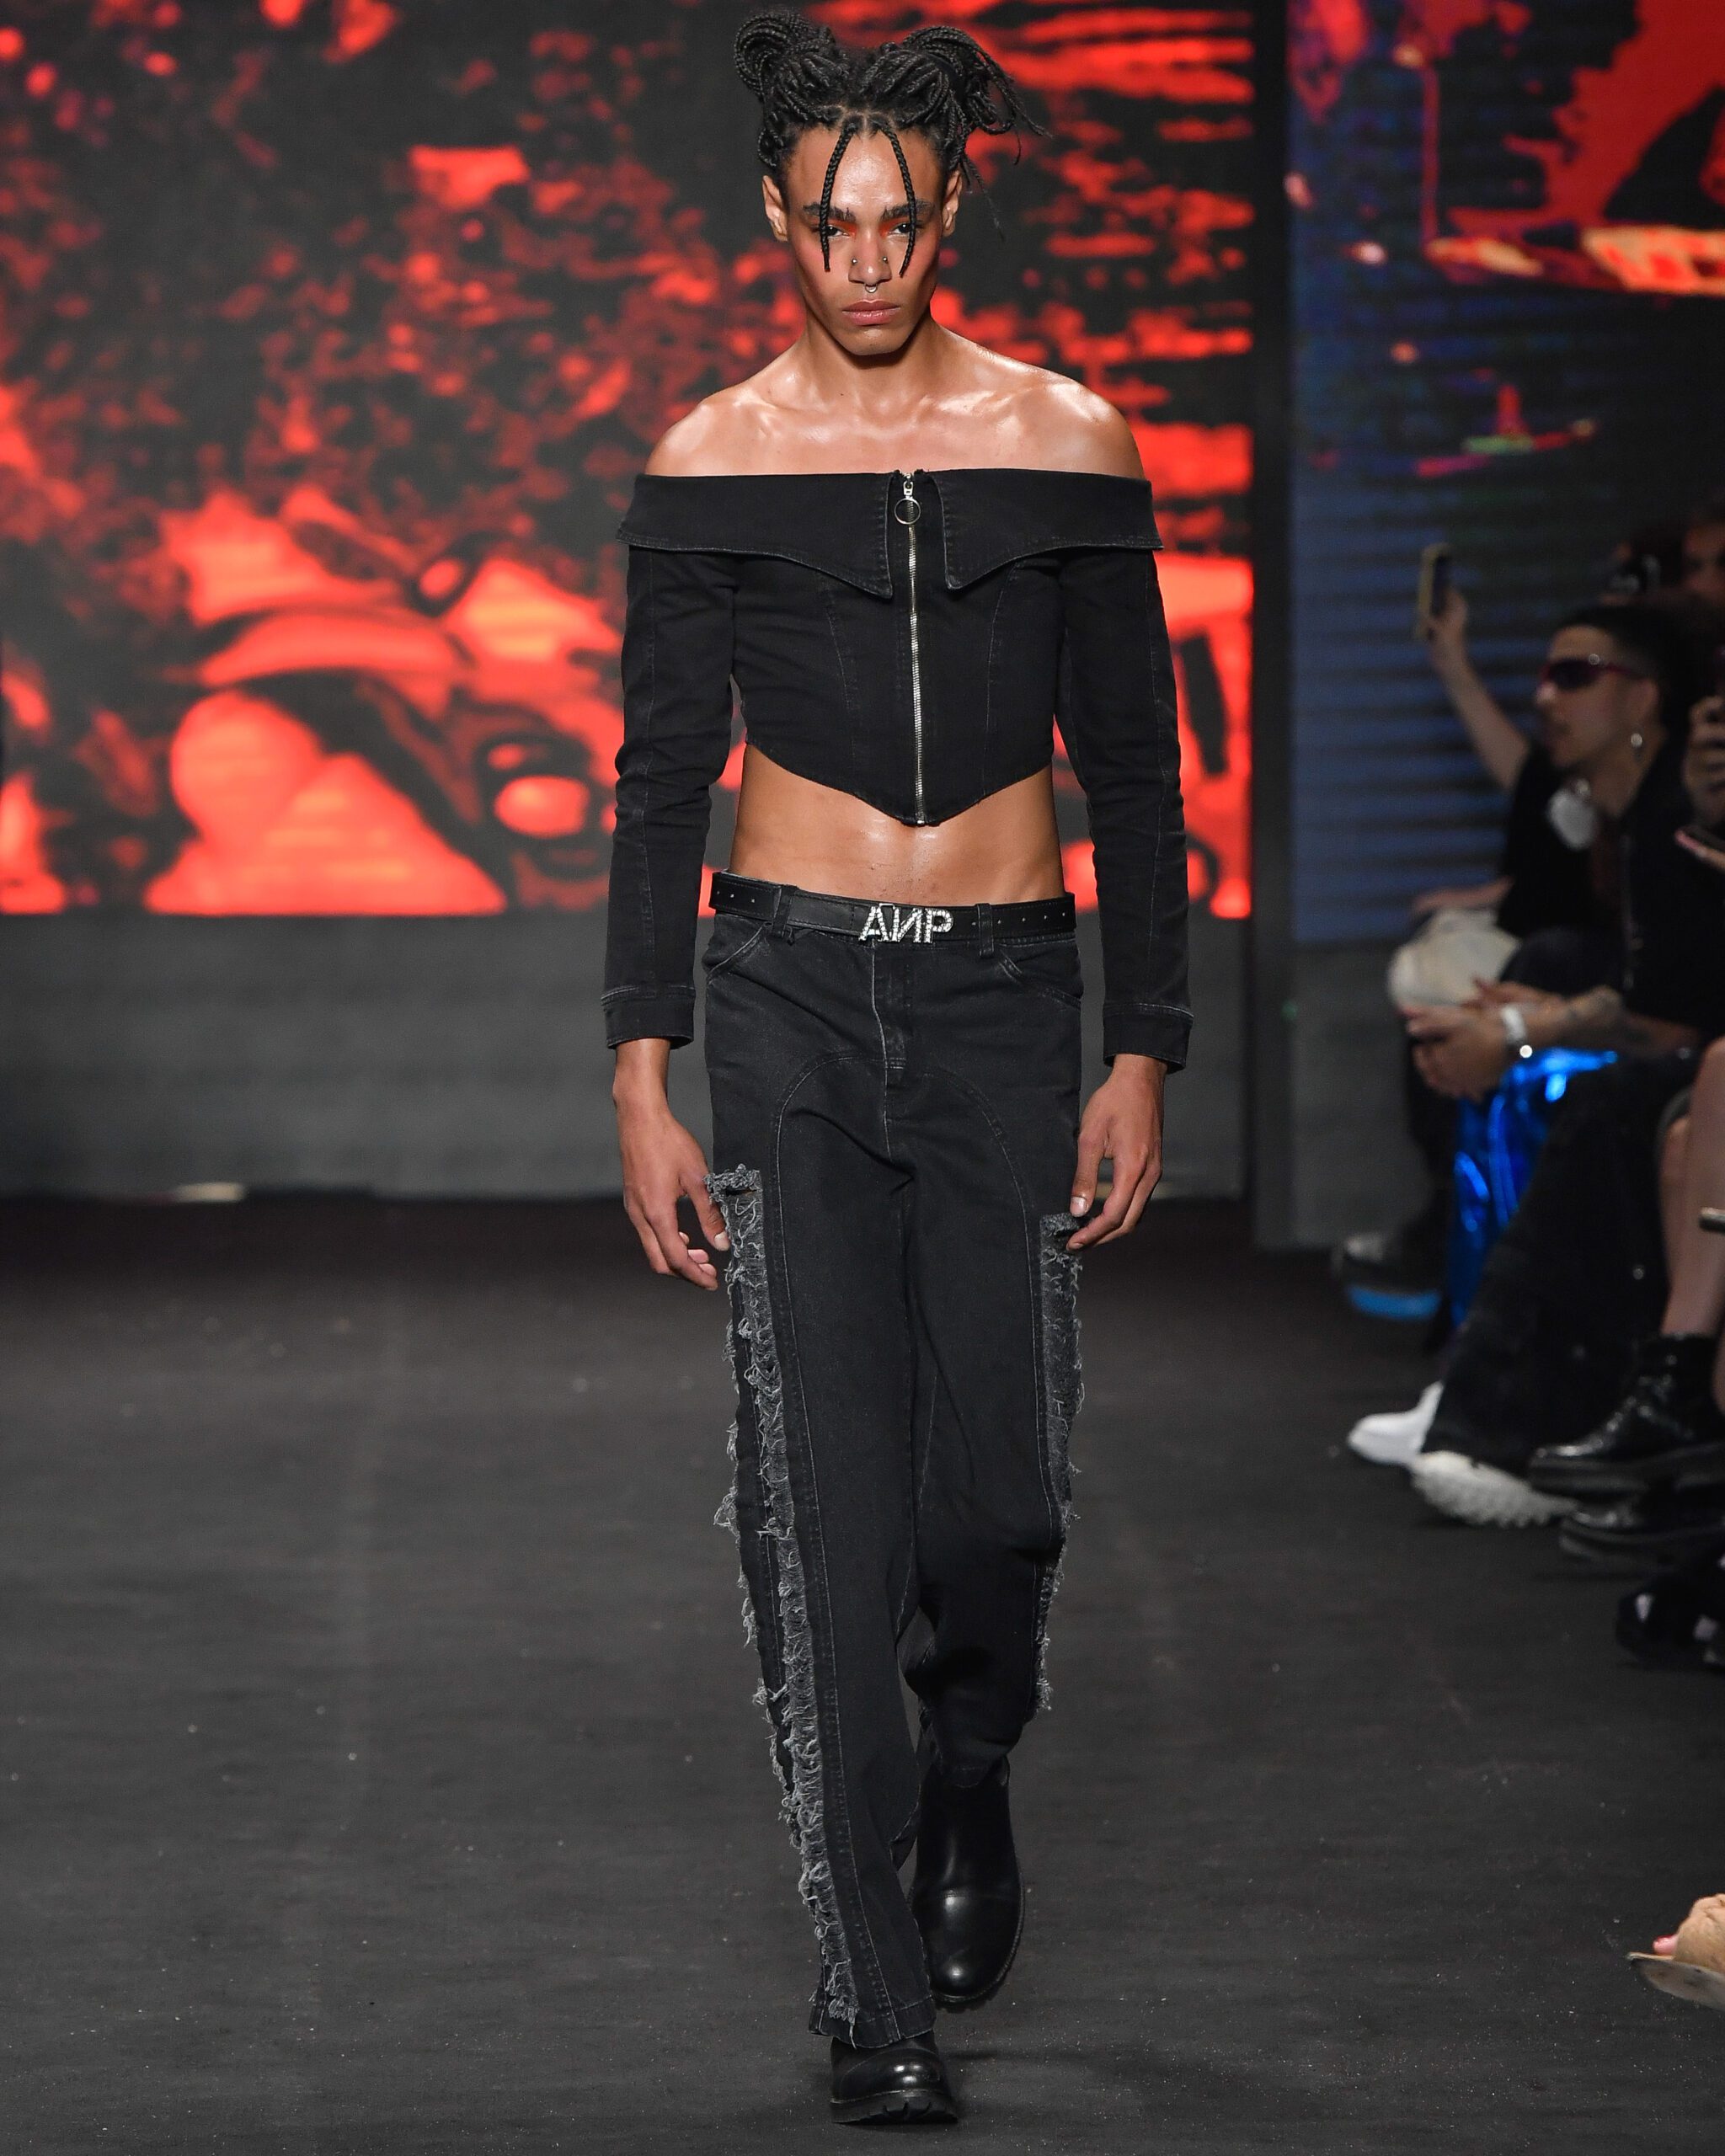 Another PlaceSPFW N54Ze Takahashi / @agfotosite